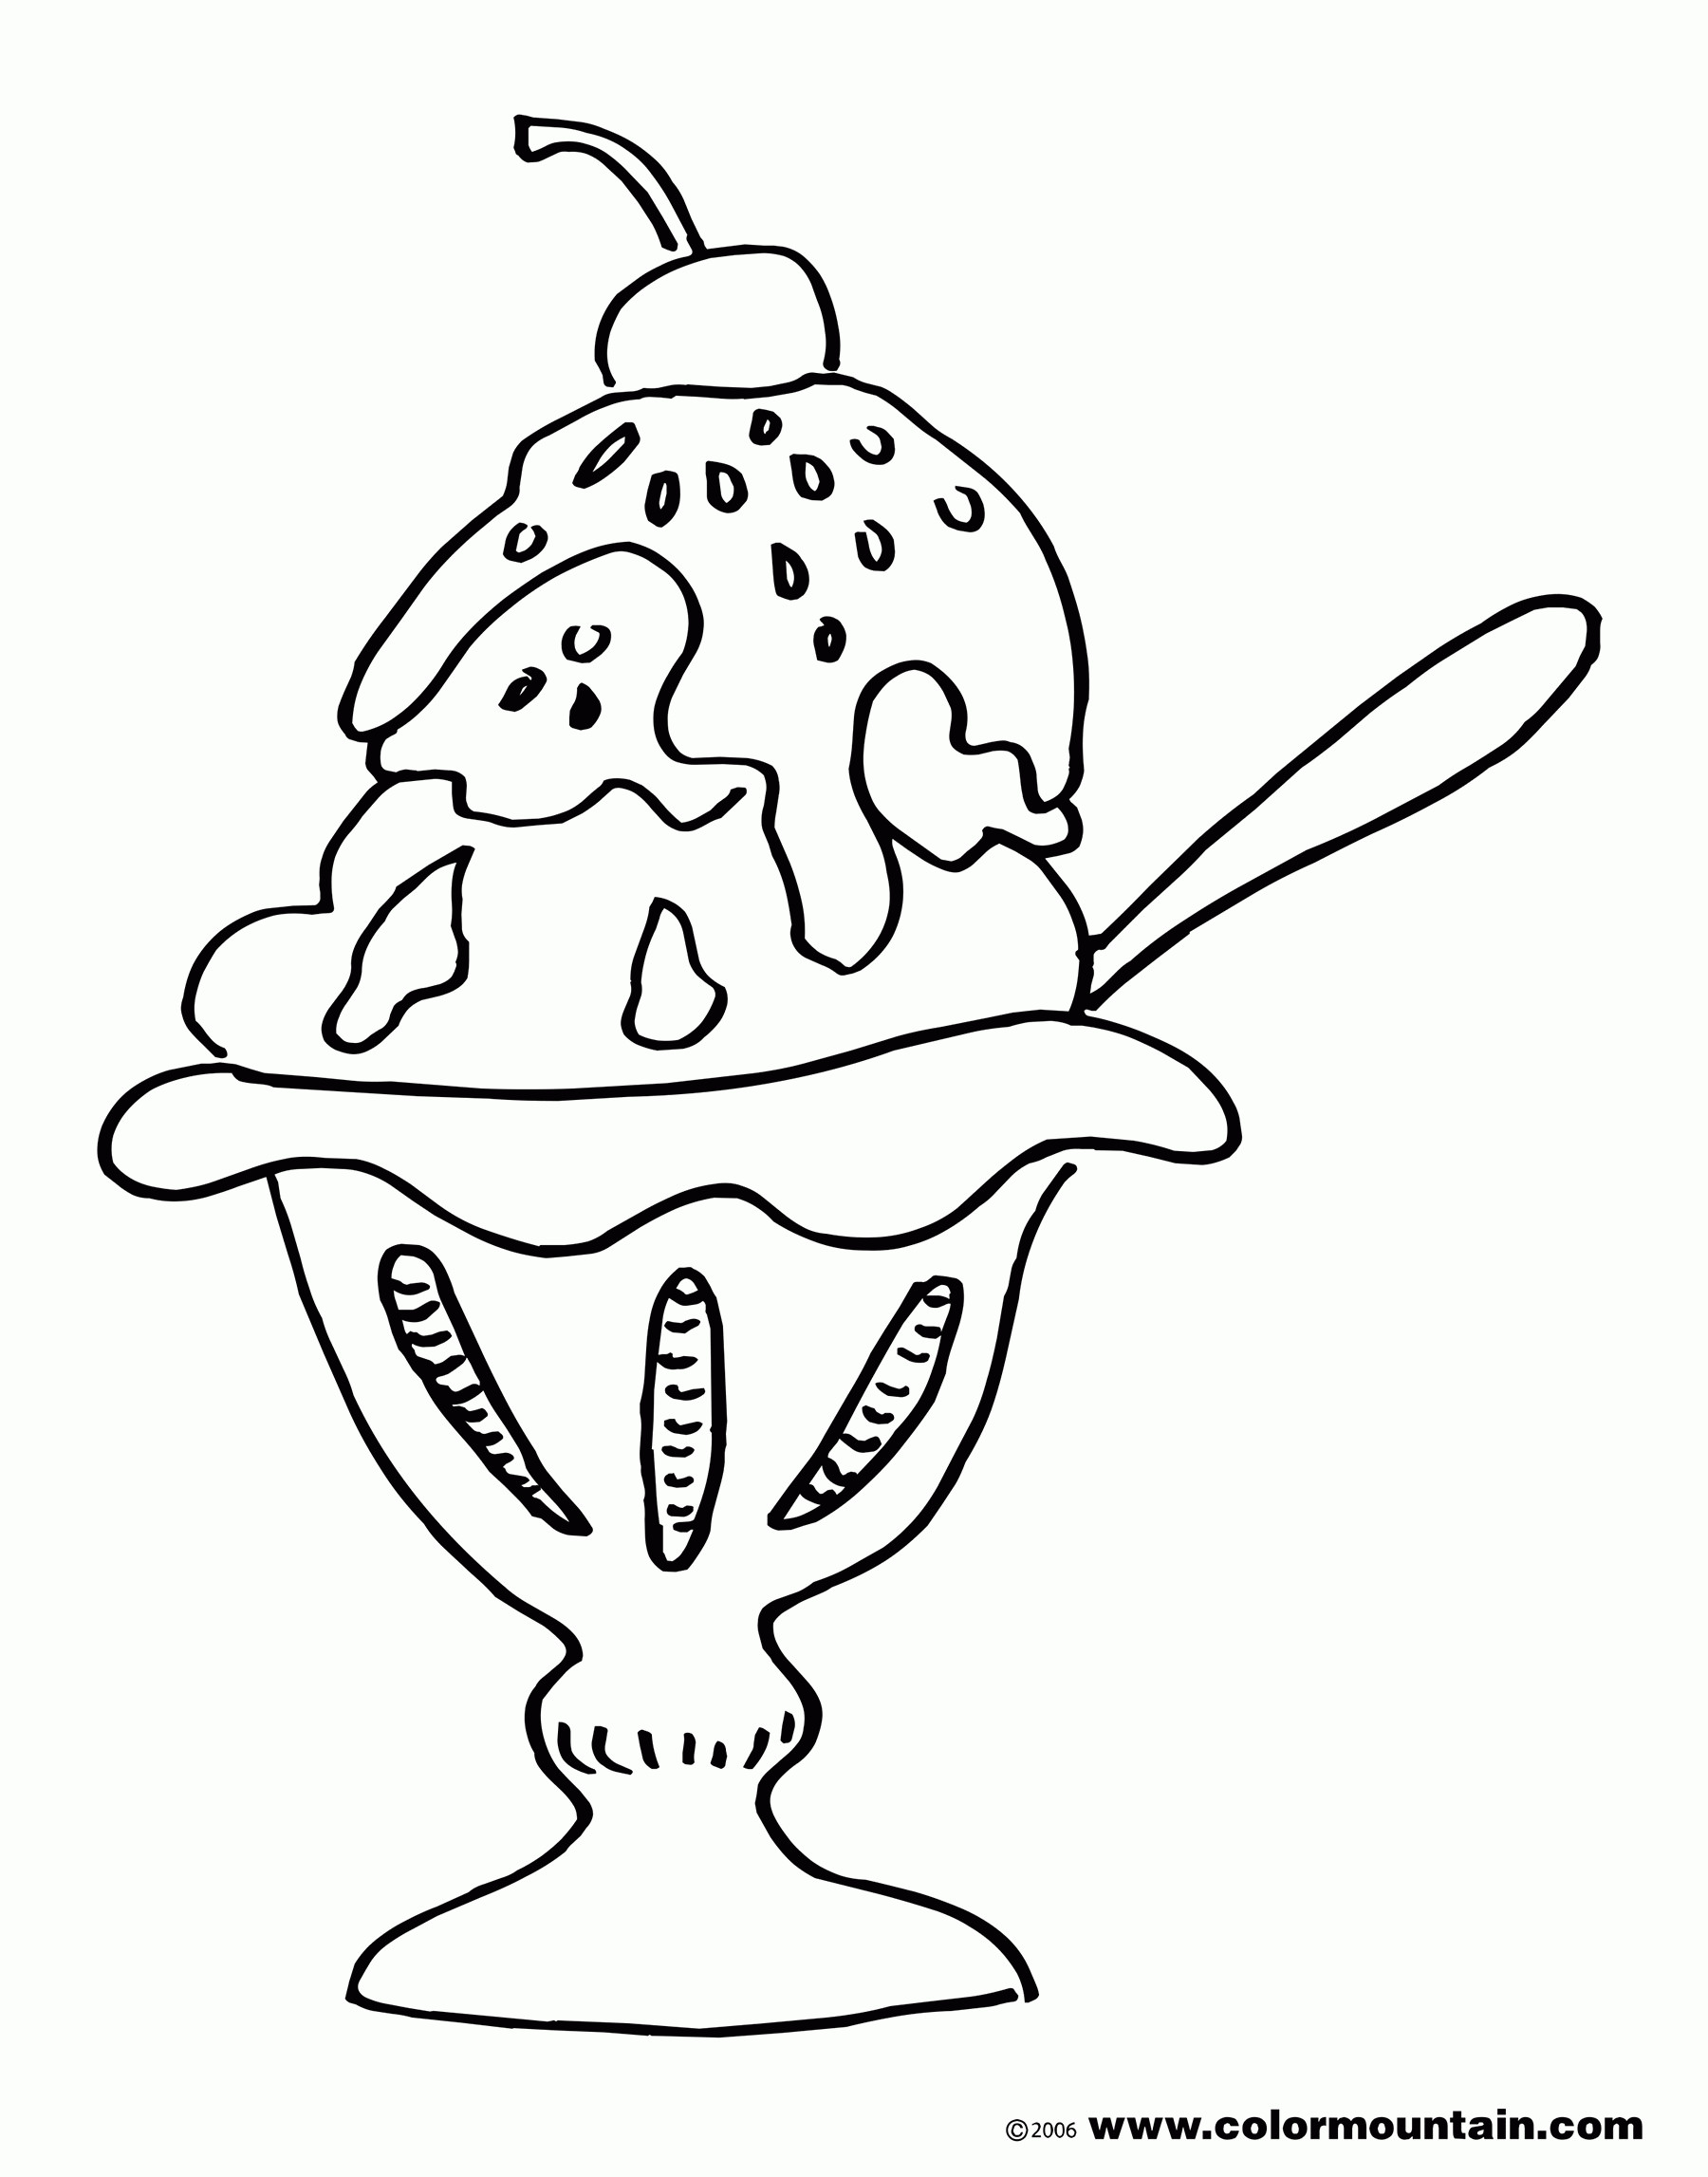 Coloring Sheets For Kids And Girls Printable Sundae
 Printable Cream Coloring Pages Coloring Home